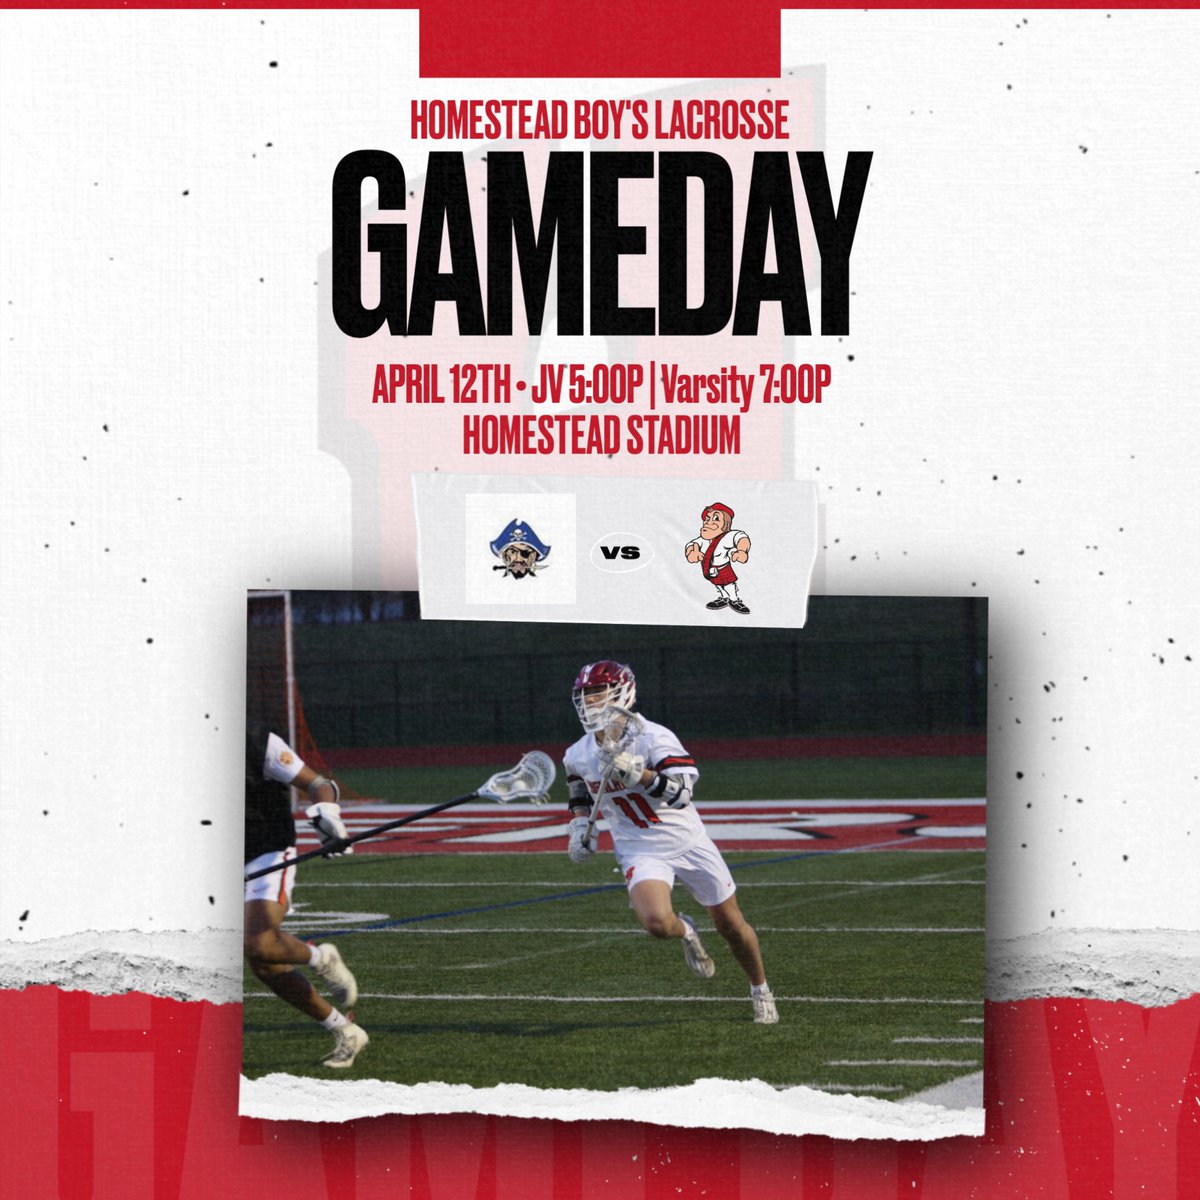 Top 10 boy's lacrosse showdown in Mequon tonight! Your #5 Homestead Highlanders host #8 Bay Port Pirates looking to stay undefeated for the season! 📍: Homestead High School Stadium ⏰: JV 5:00p | Varsity 7:00p #letsgetrowdy